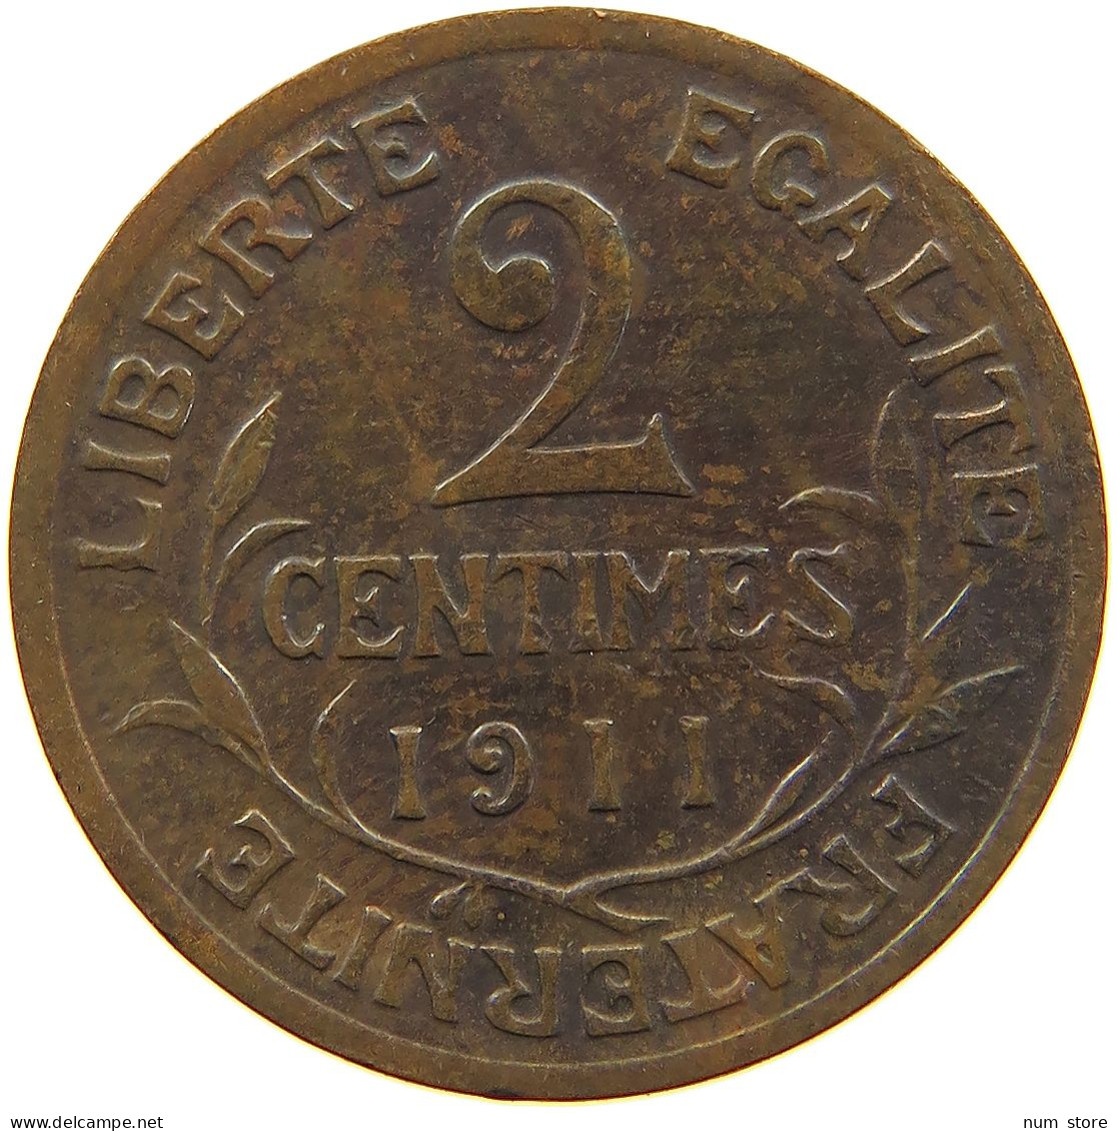 FRANCE 2 CENTIMES 1911  #MA 100849 - 2 Centimes